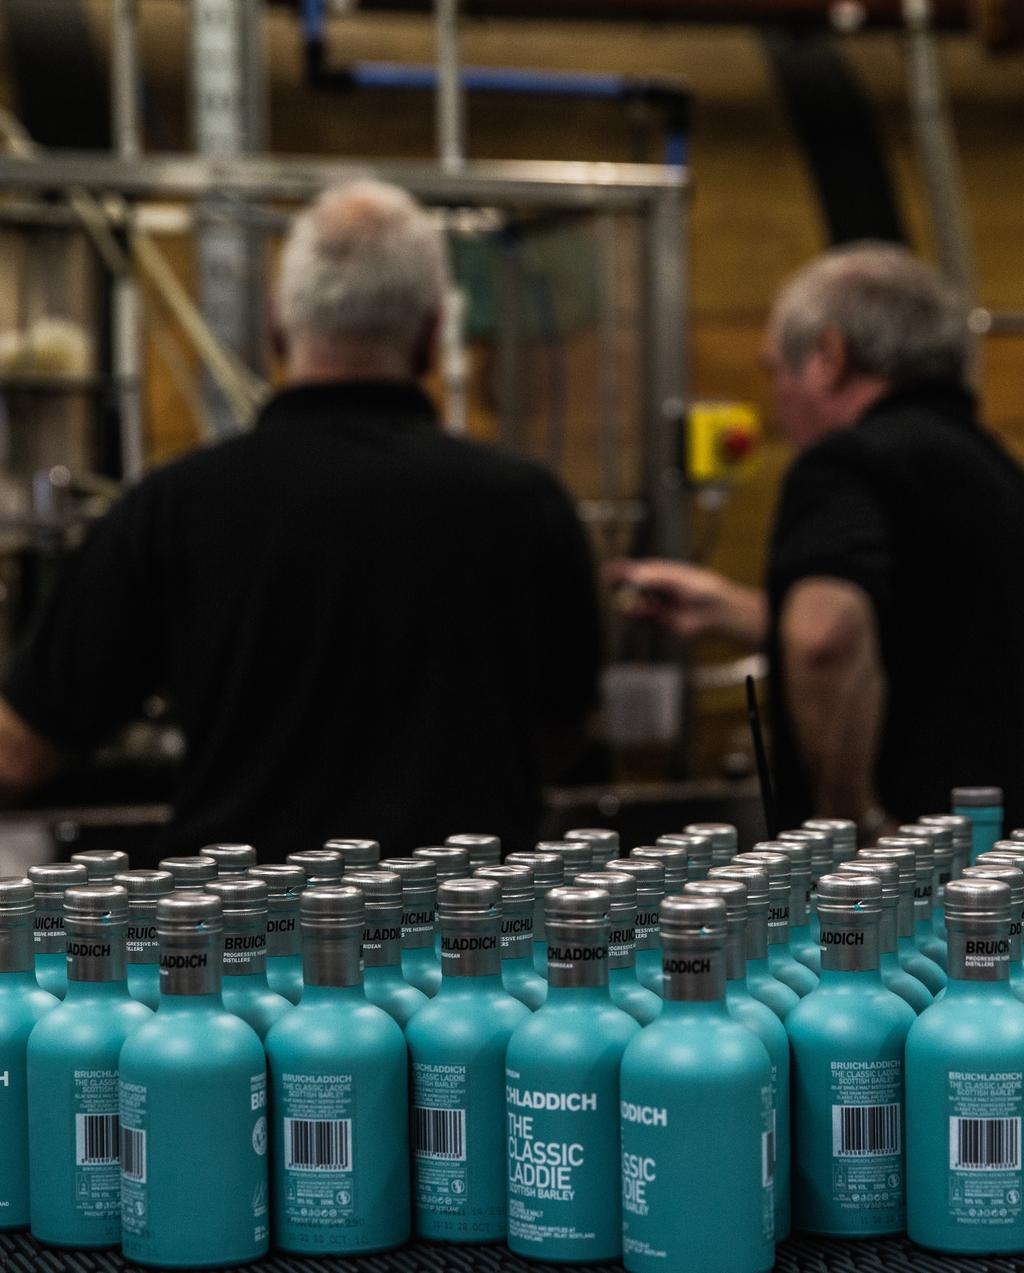 TRANSPARENCY IS APPARENT EVERYWHERE HERE AT BRUICHLADDICH.